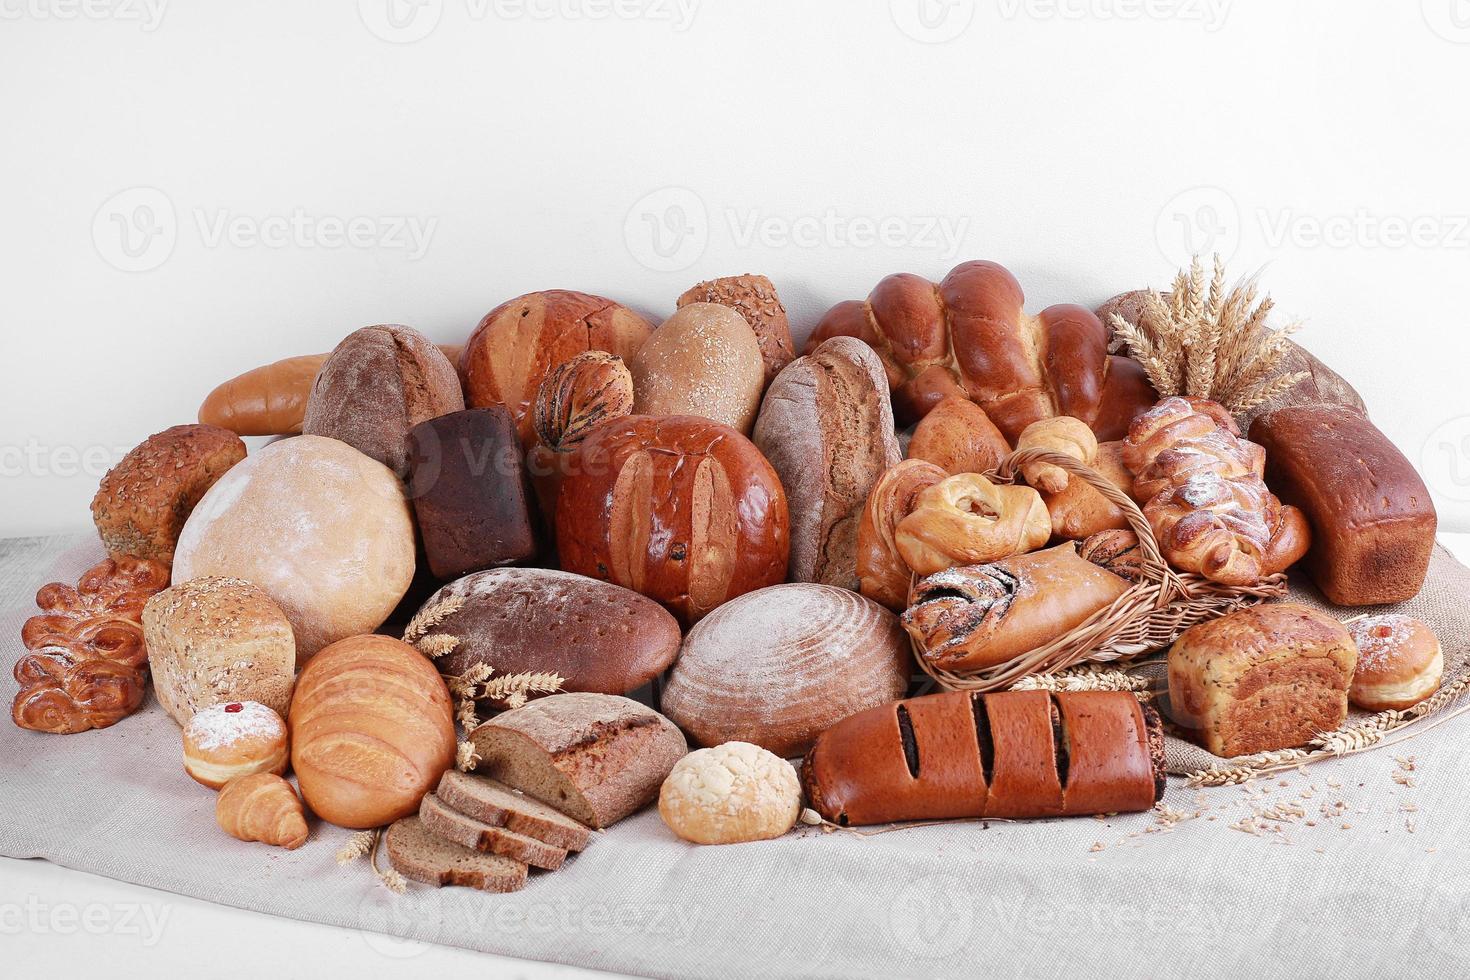 Different types of baked goods on linen and white wall background photo